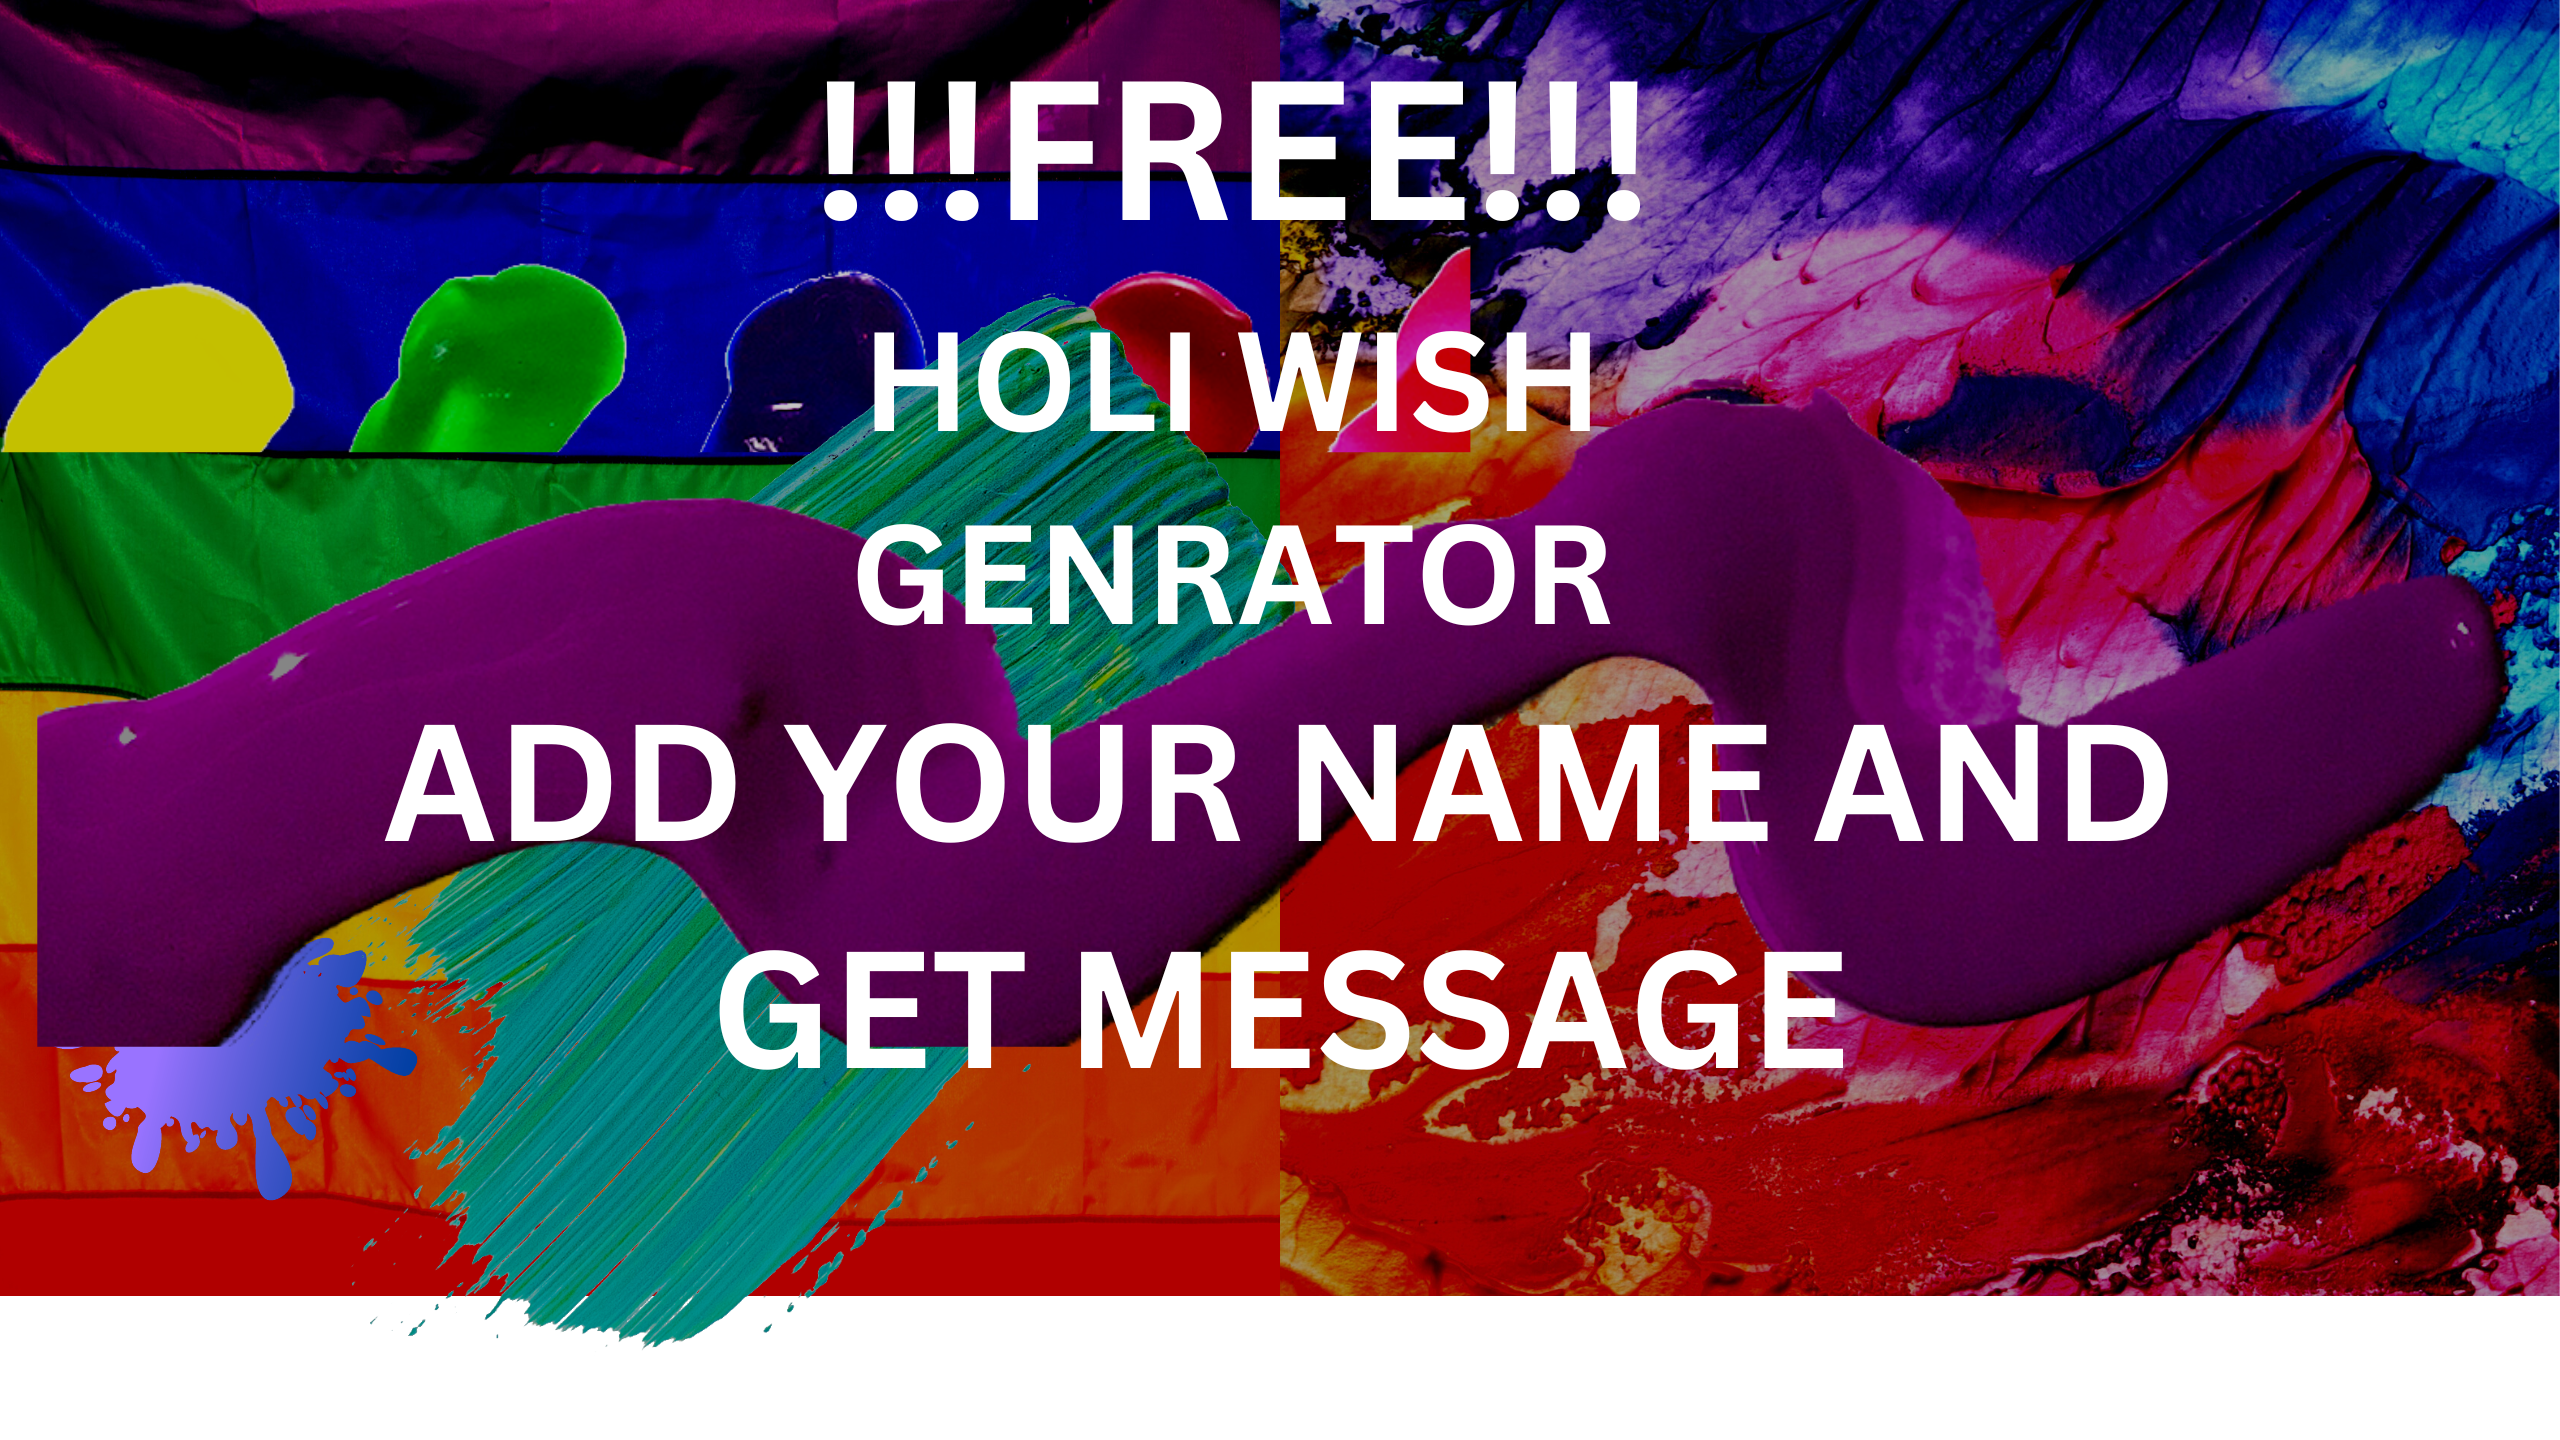 Holi wish generator with your name